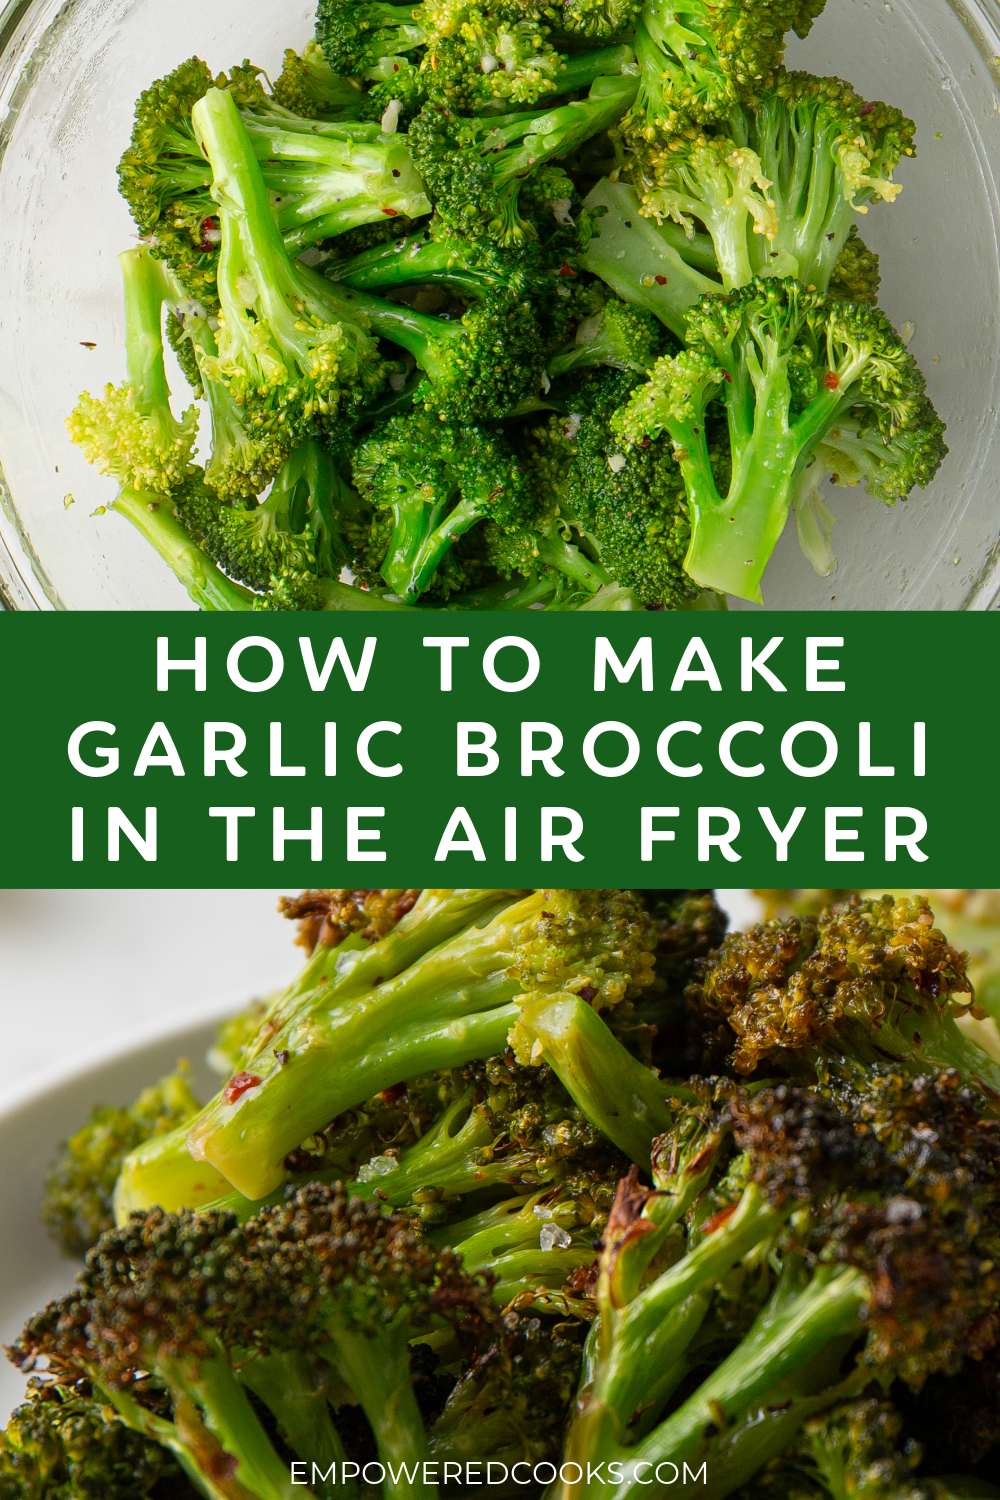 How to make garlic broccoli in the air fryer